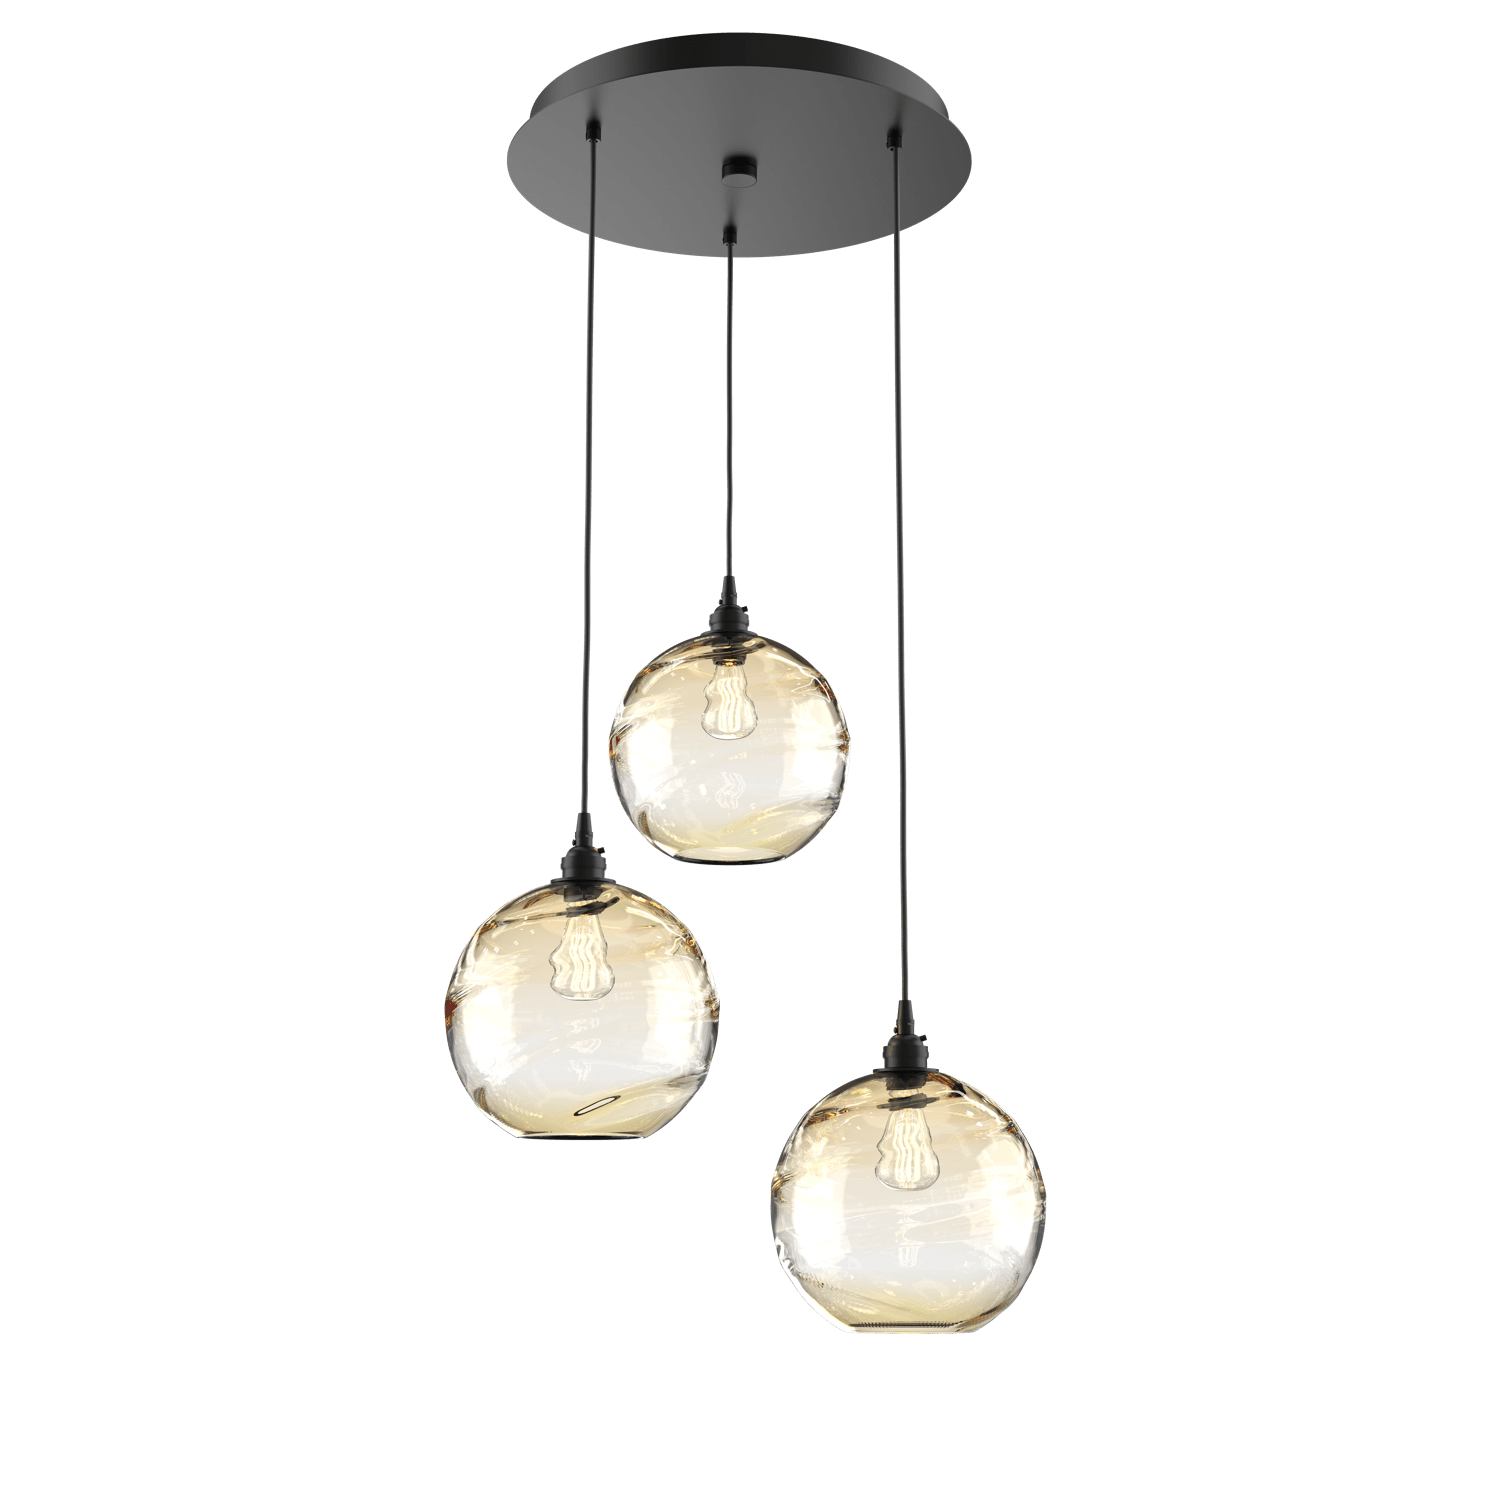 CHB0047-03-MB-OA-Hammerton-Studio-Optic-Blown-Glass-Terra-3-light-round-pendant-chandelier-with-matte-black-finish-and-optic-amber-blown-glass-shades-and-incandescent-lamping